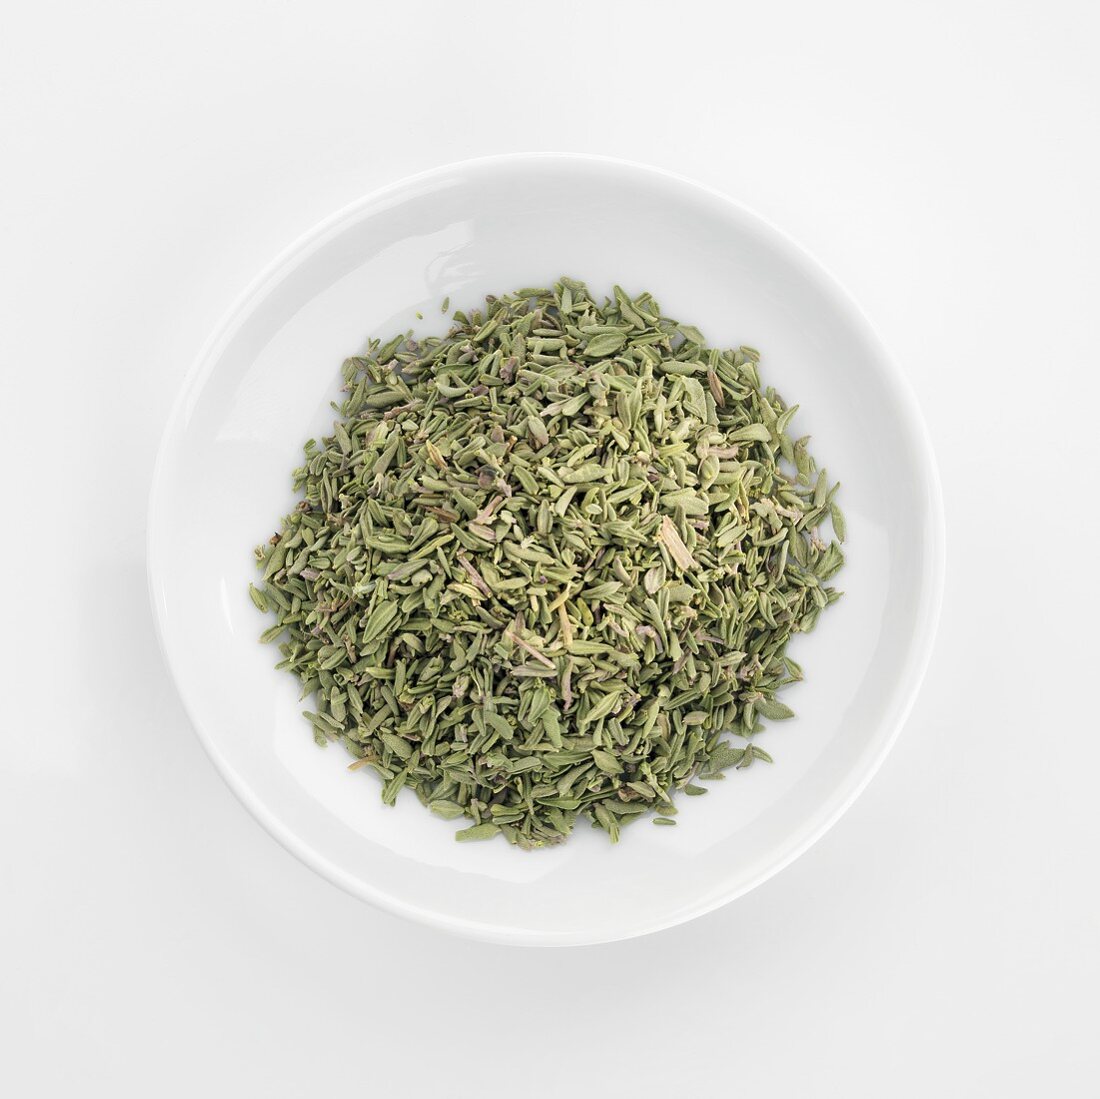 Dried thyme in white dish